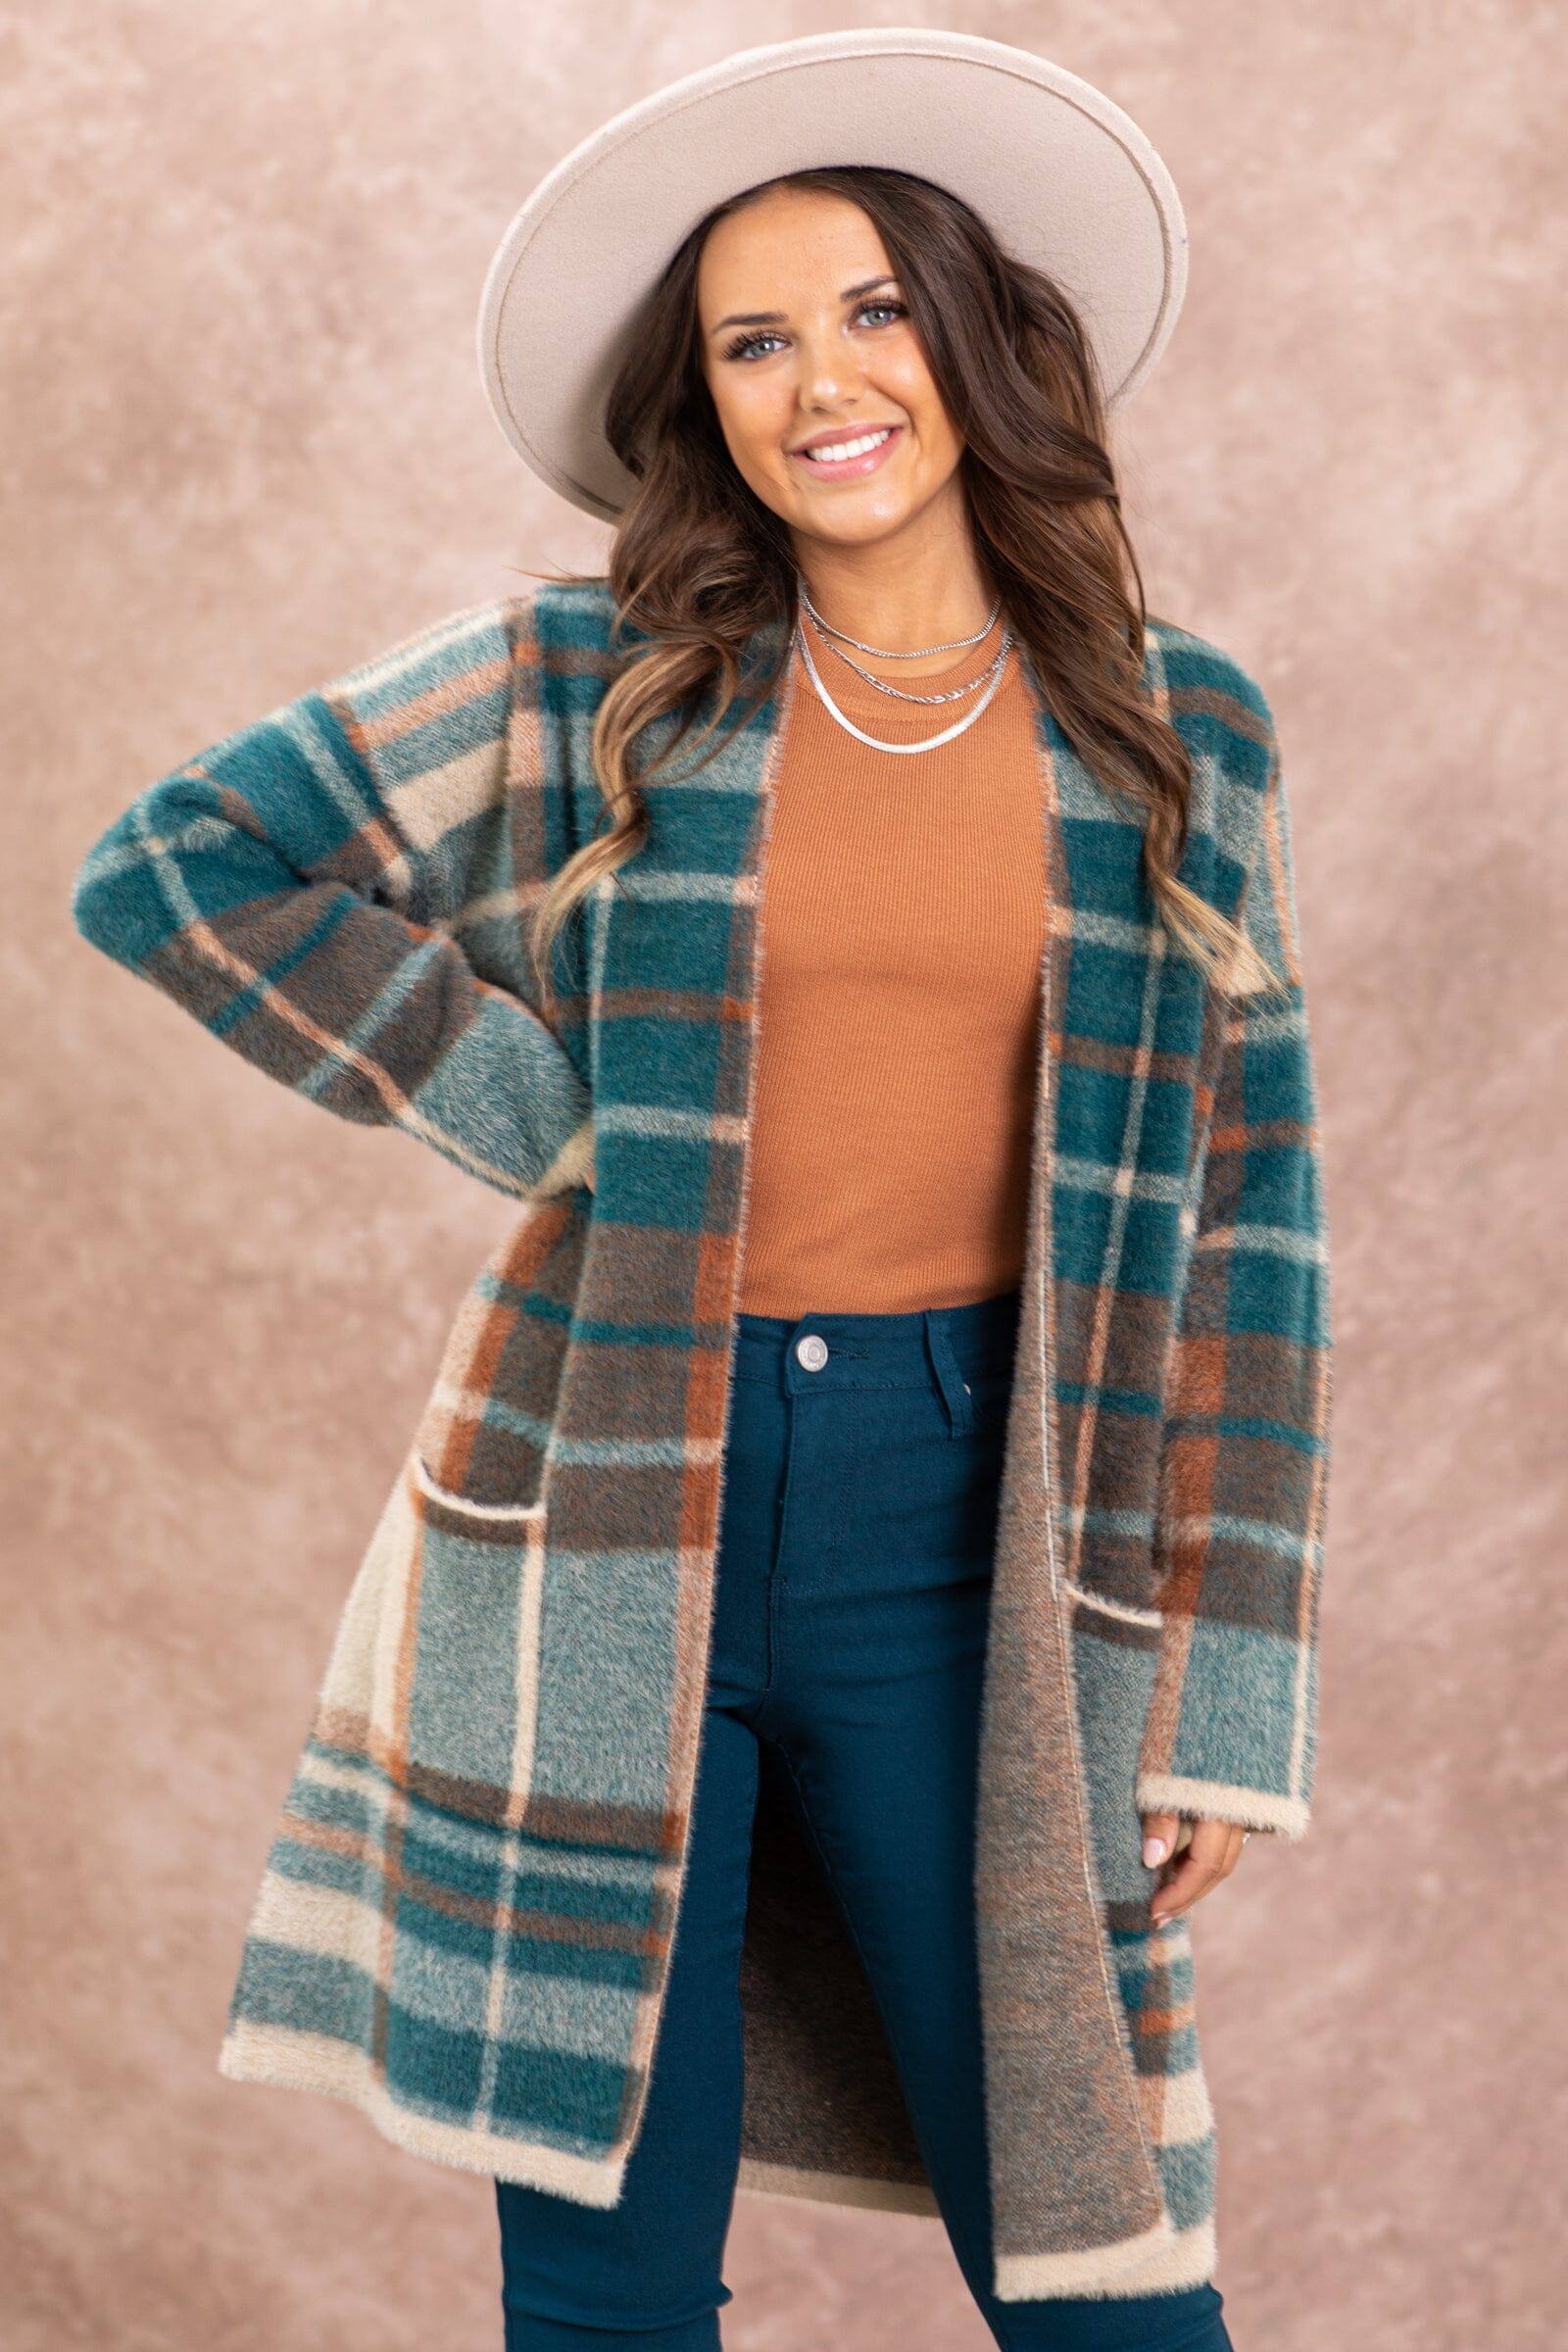 Teal and Cognac Plaid Cardigan With Pockets · Filly Flair